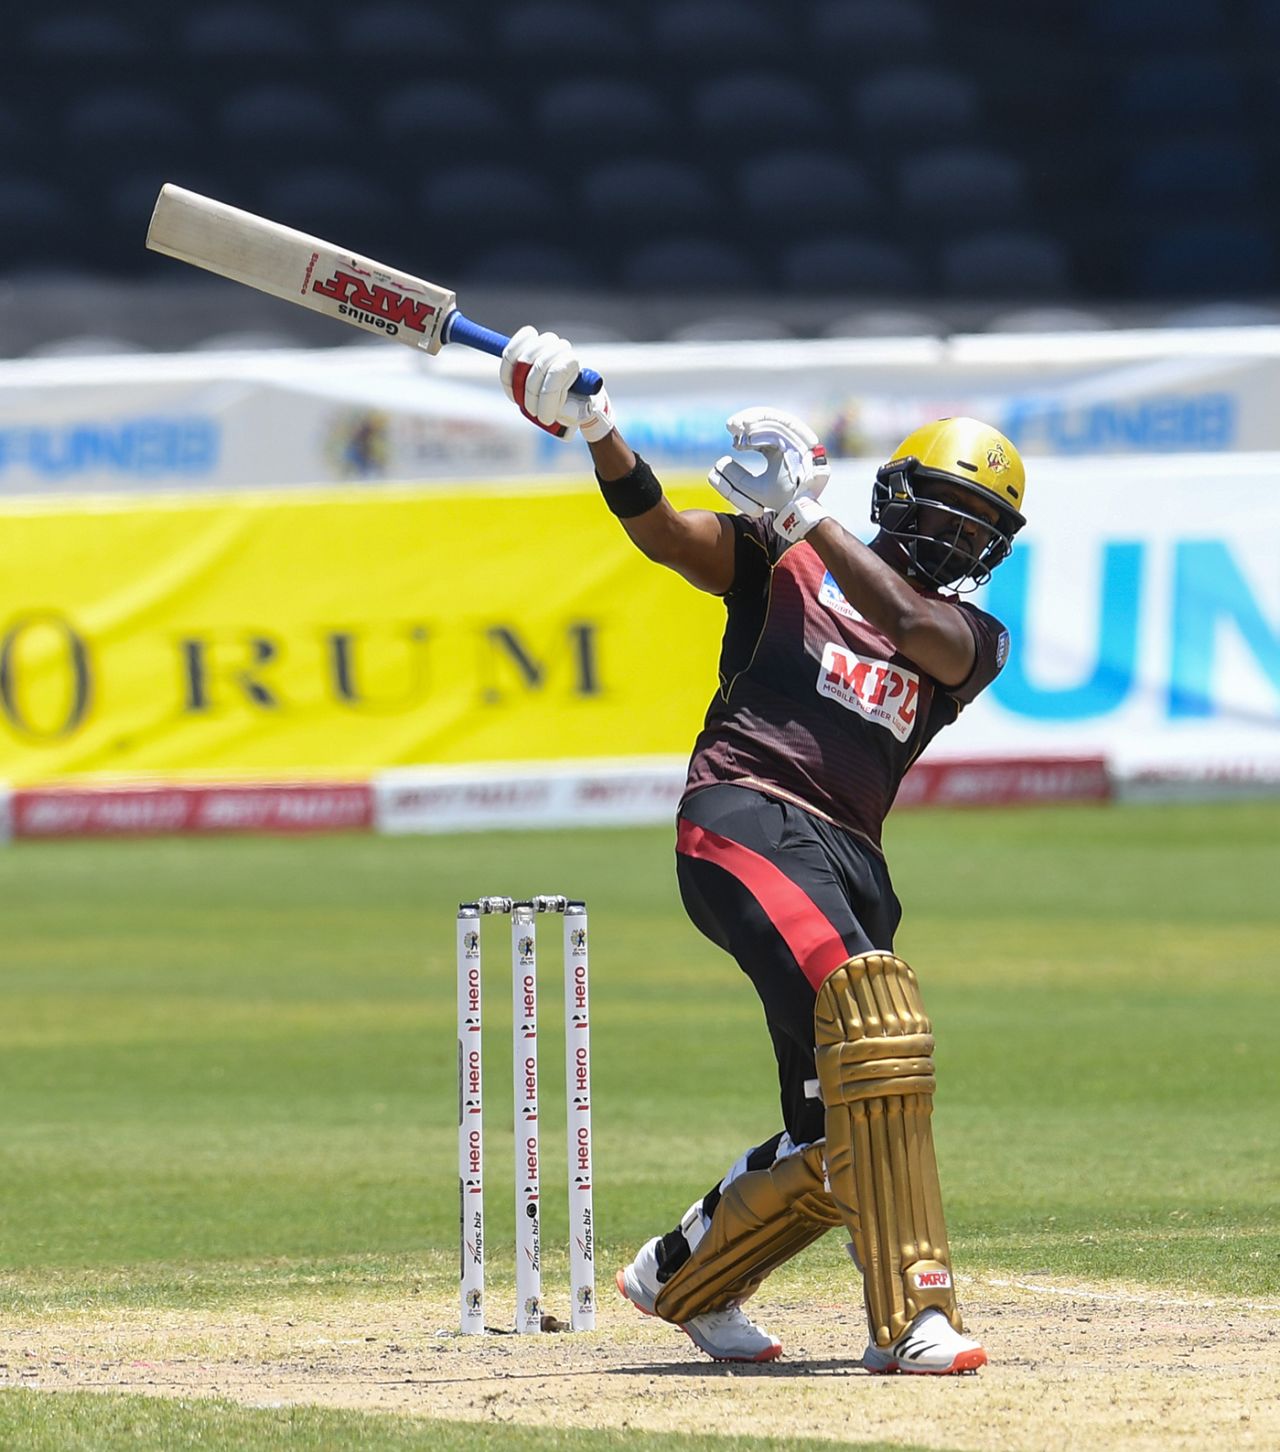 Darren Bravo's bottom hand comes off as he goes for a big hit, St Lucia Zouks v Trinbago Knight Riders, CPL 2020, Tarouba, September 5, 2020